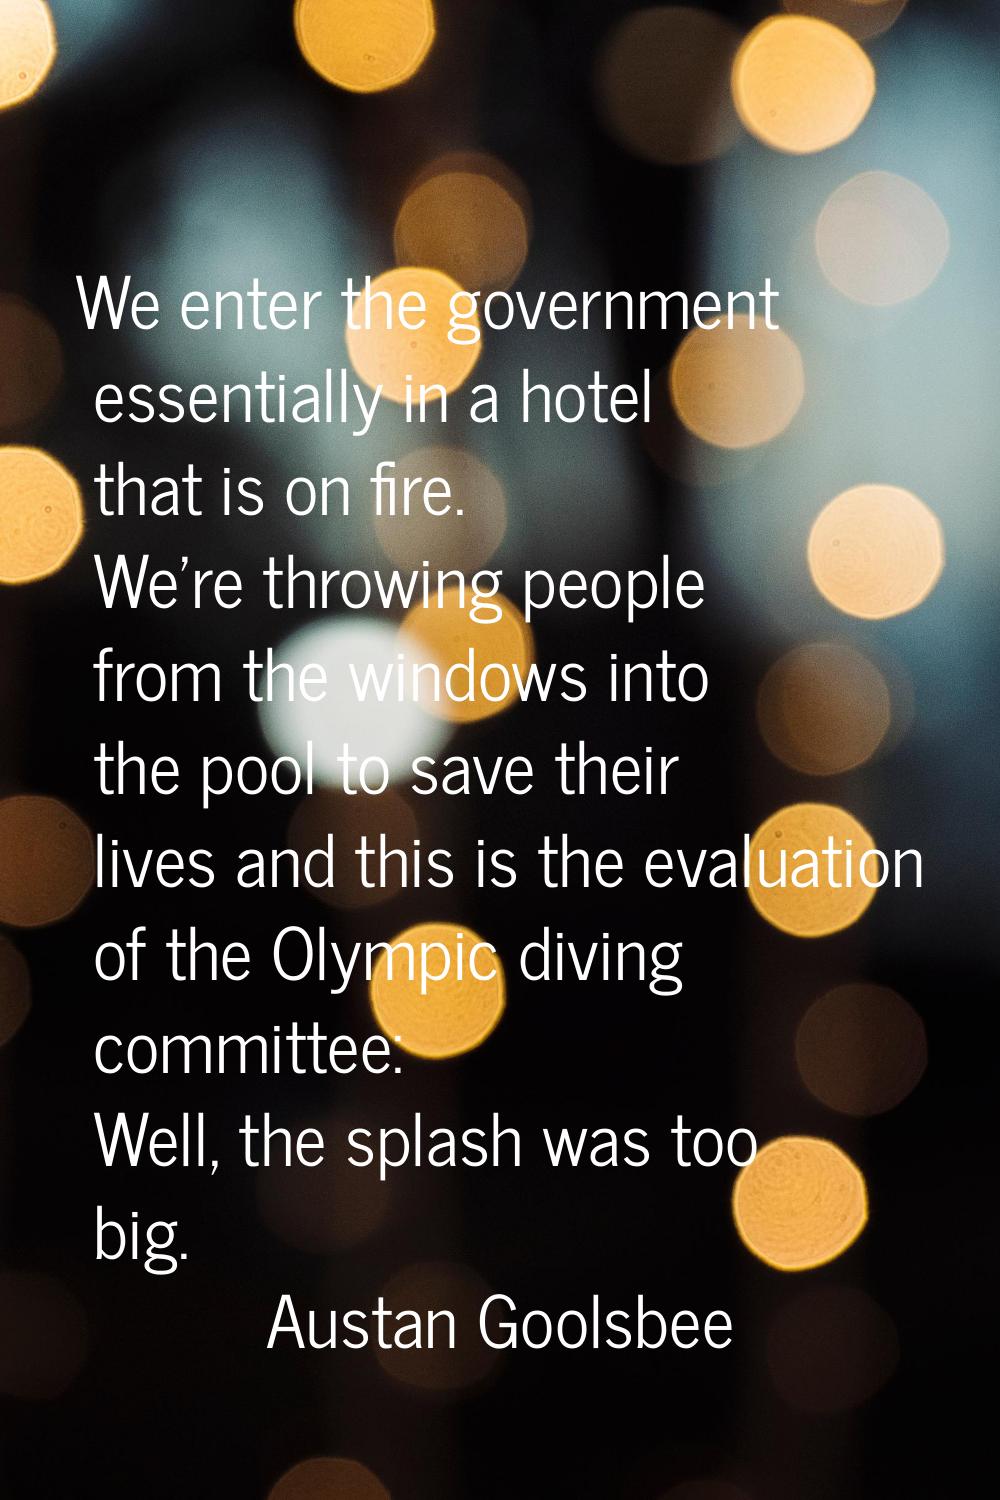 We enter the government essentially in a hotel that is on fire. We're throwing people from the wind